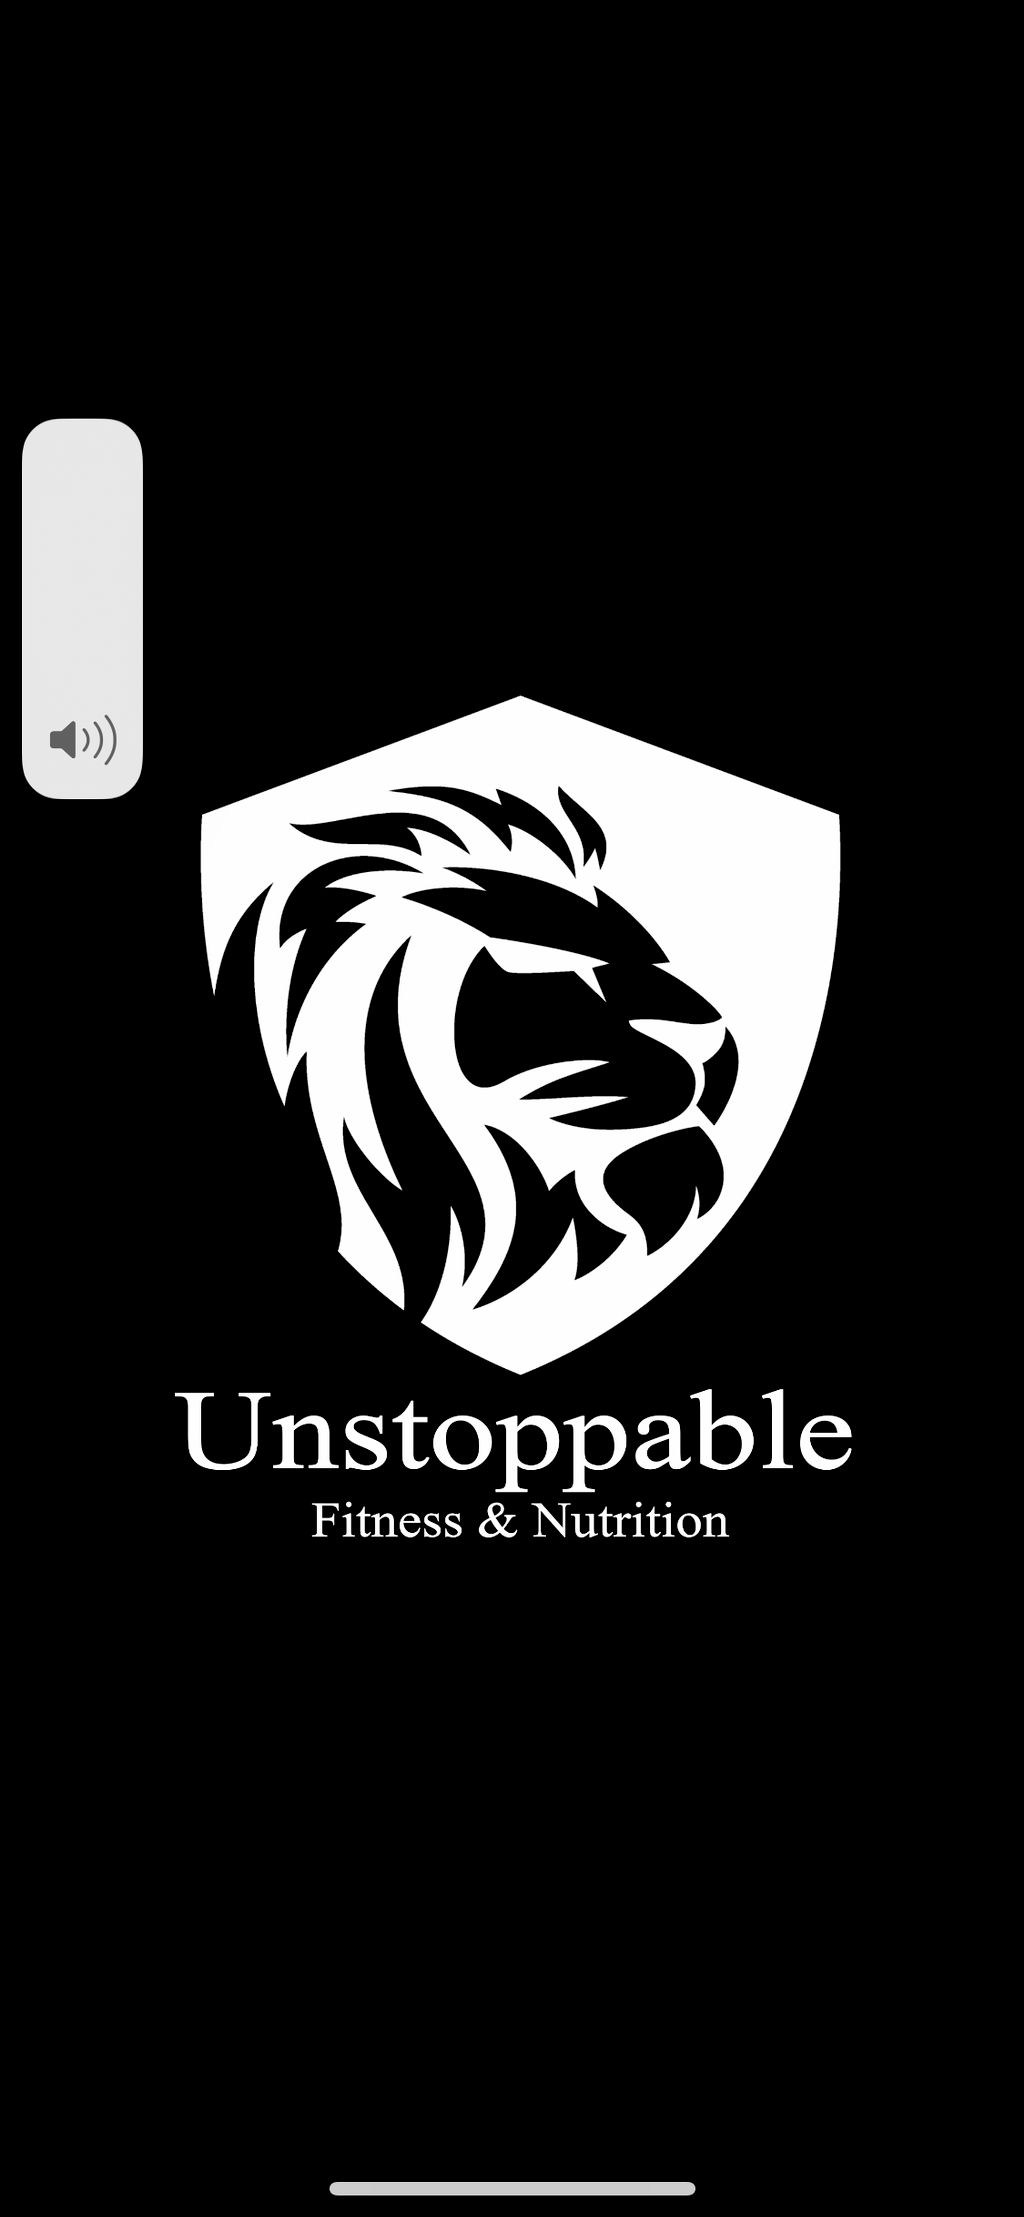 Unstoppable Fitness